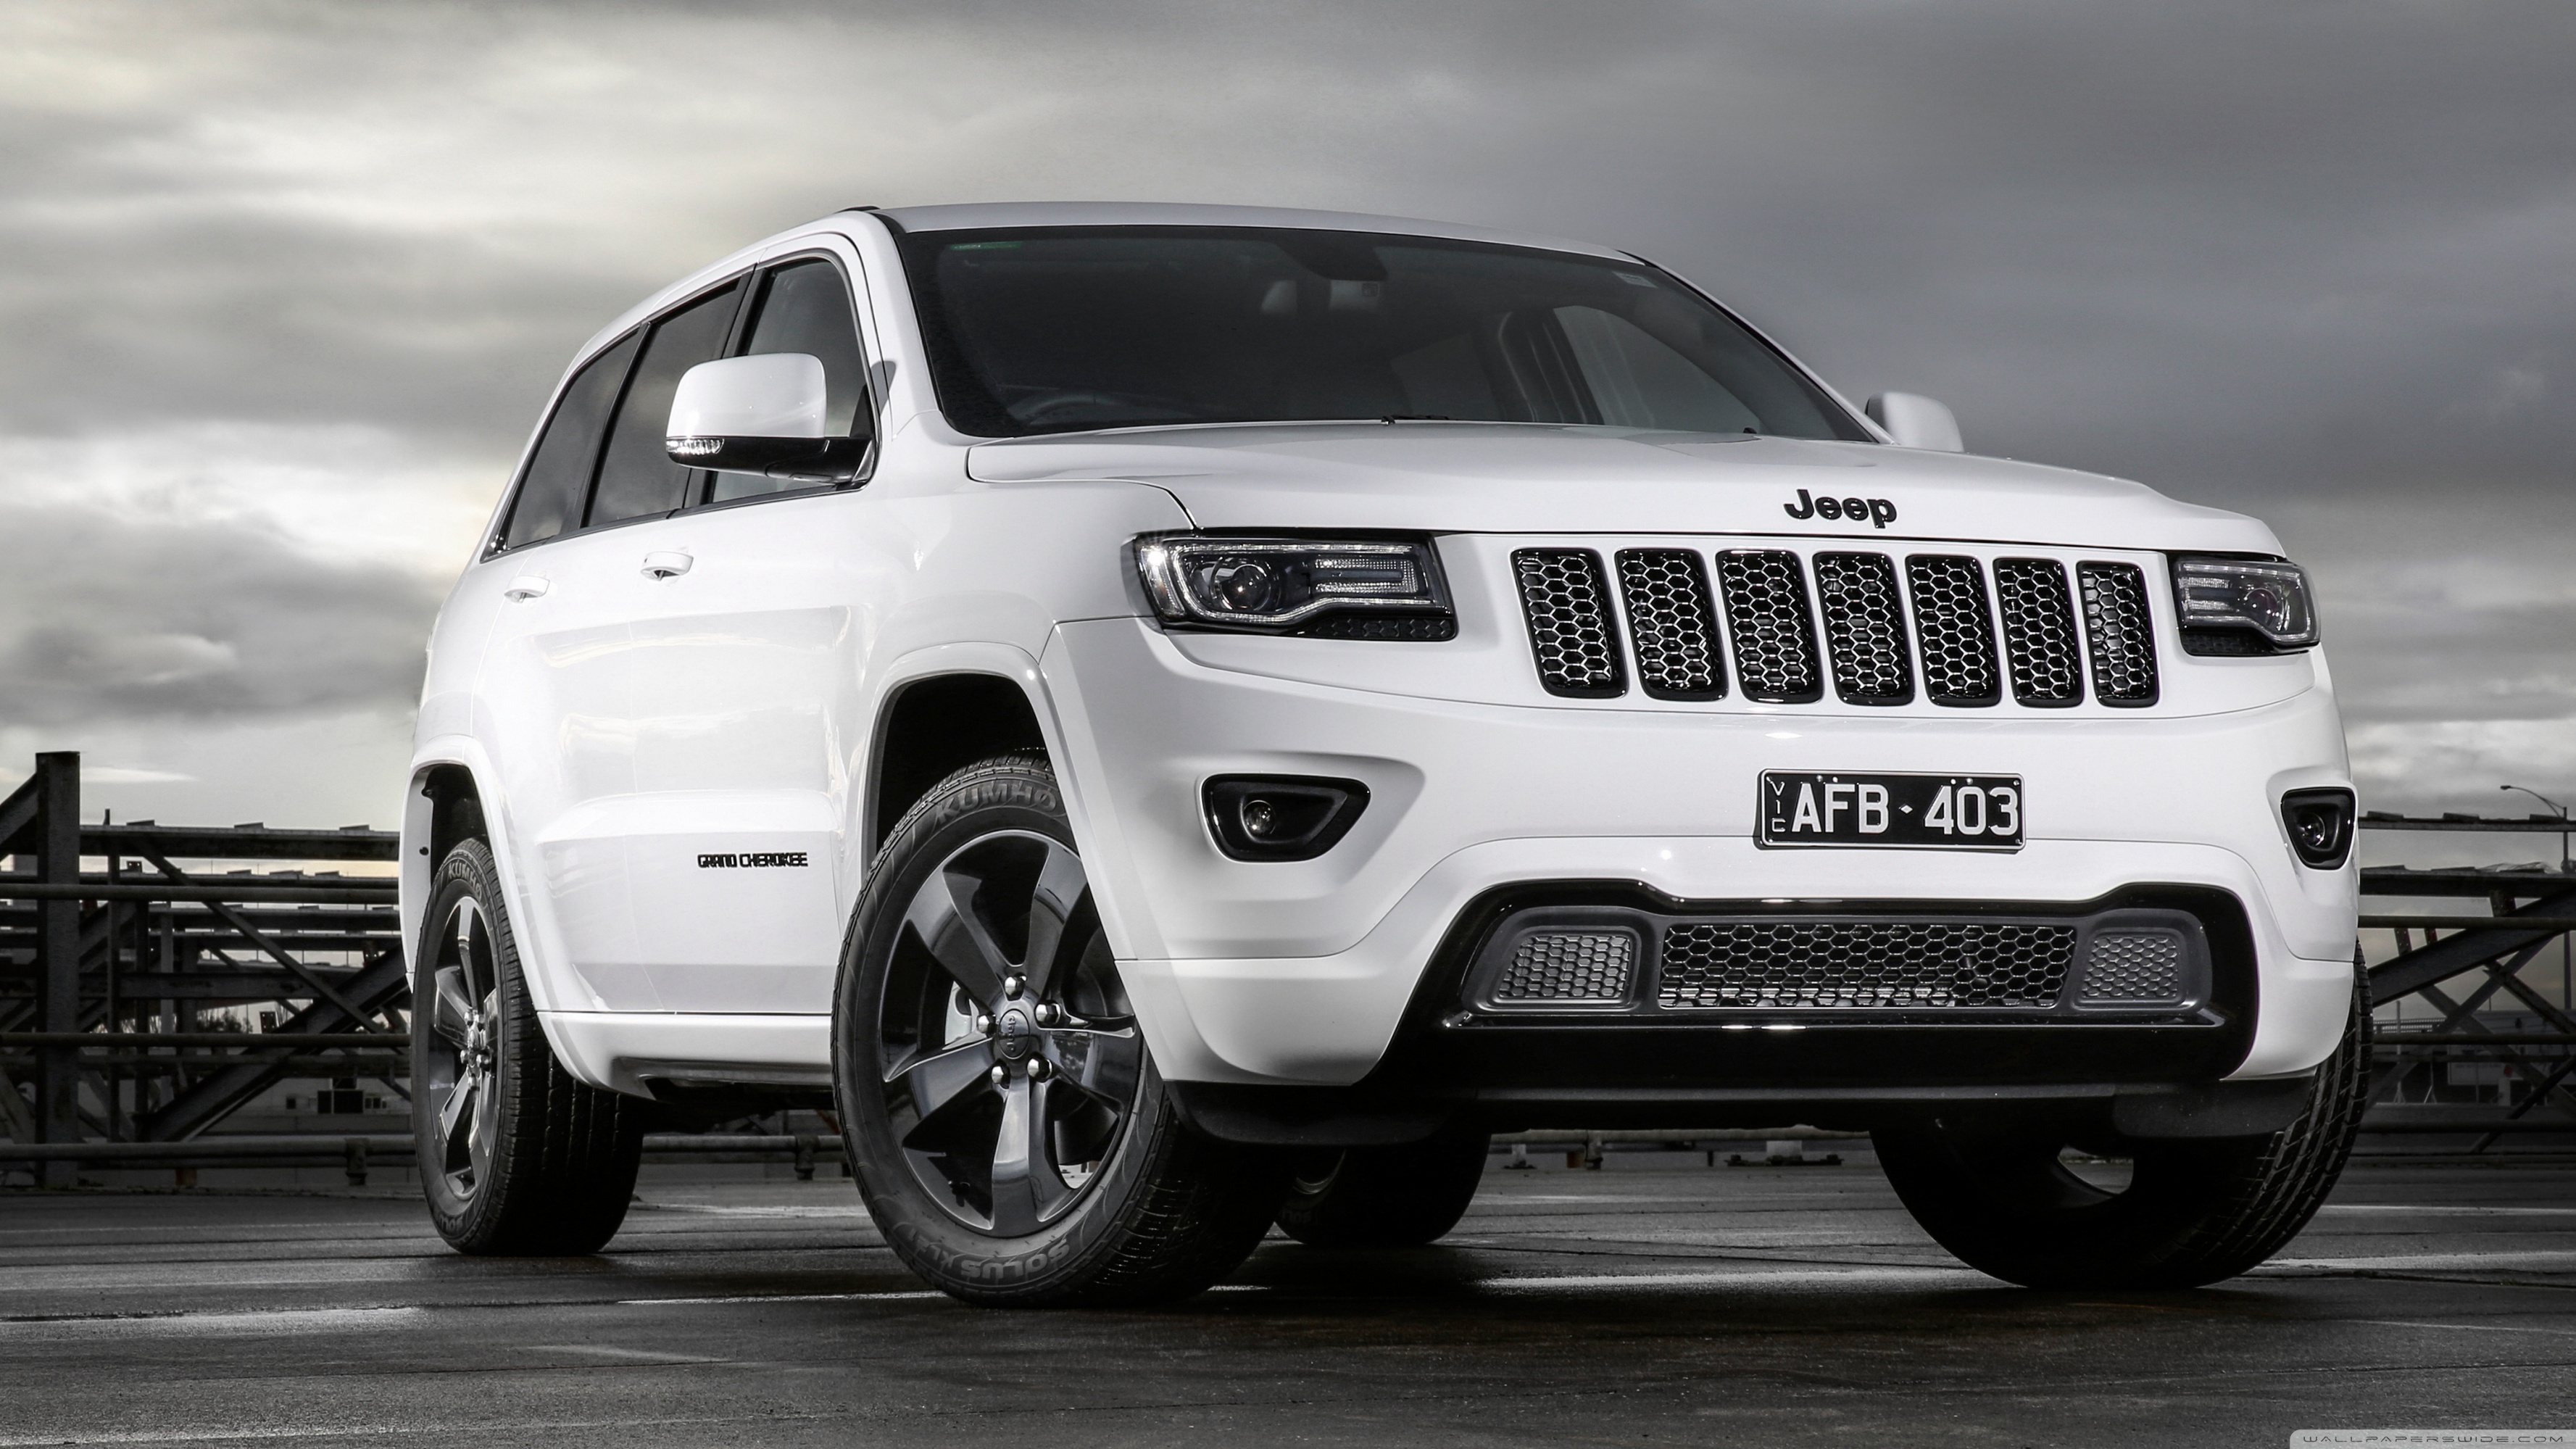 Jeep Grand Cherokee Wallpaper and Background Image